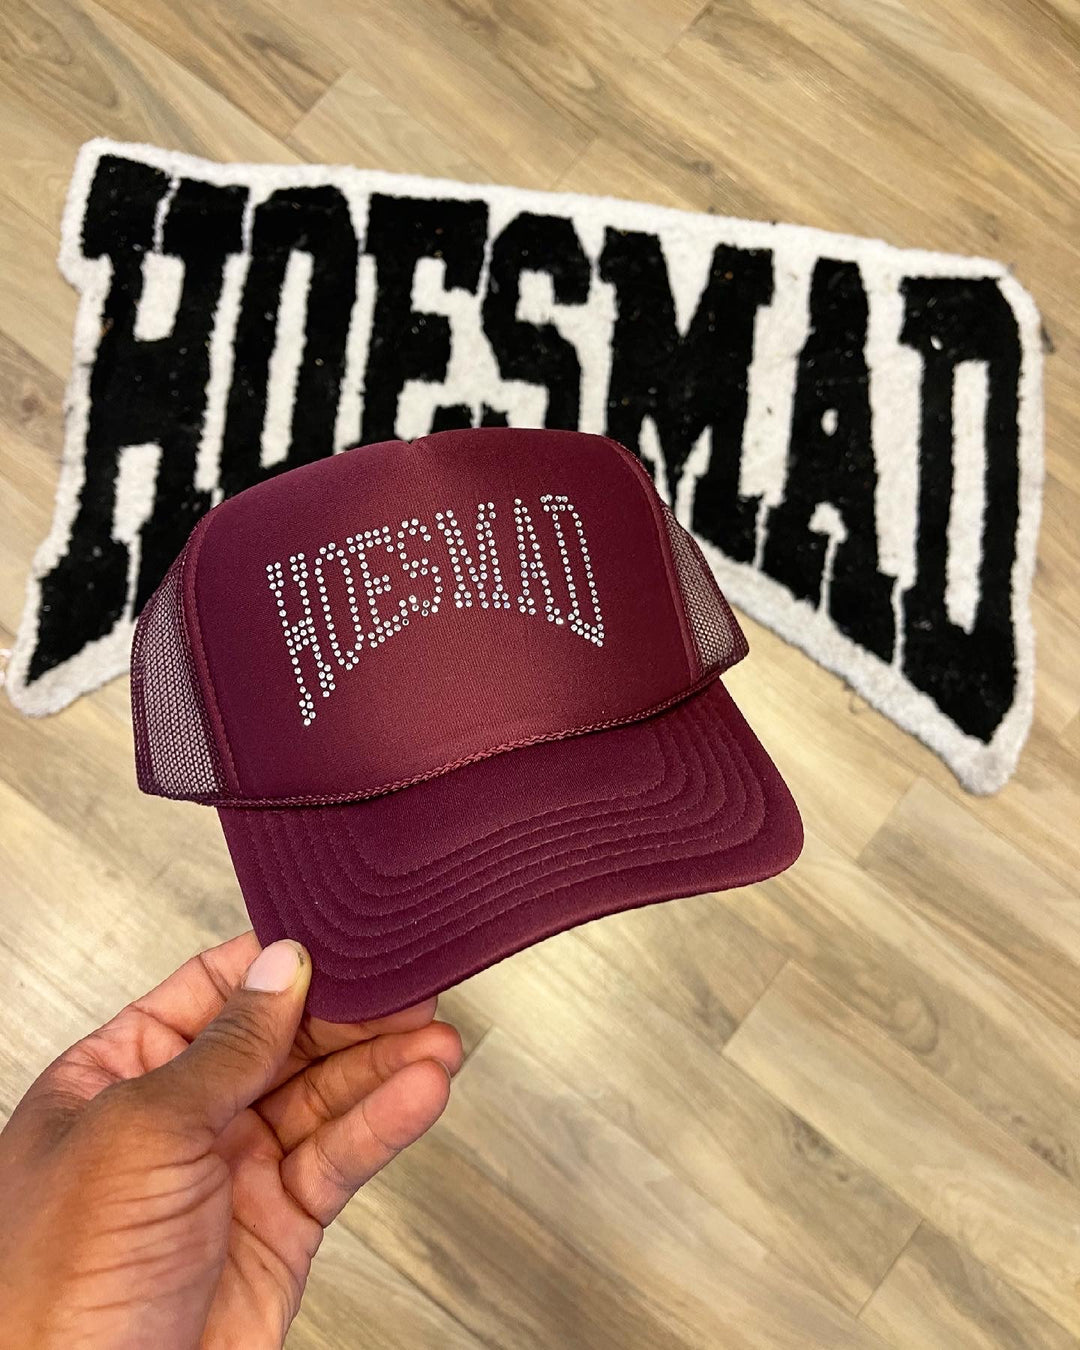 HOES MAD TRUCKER HAT - BURGANDY